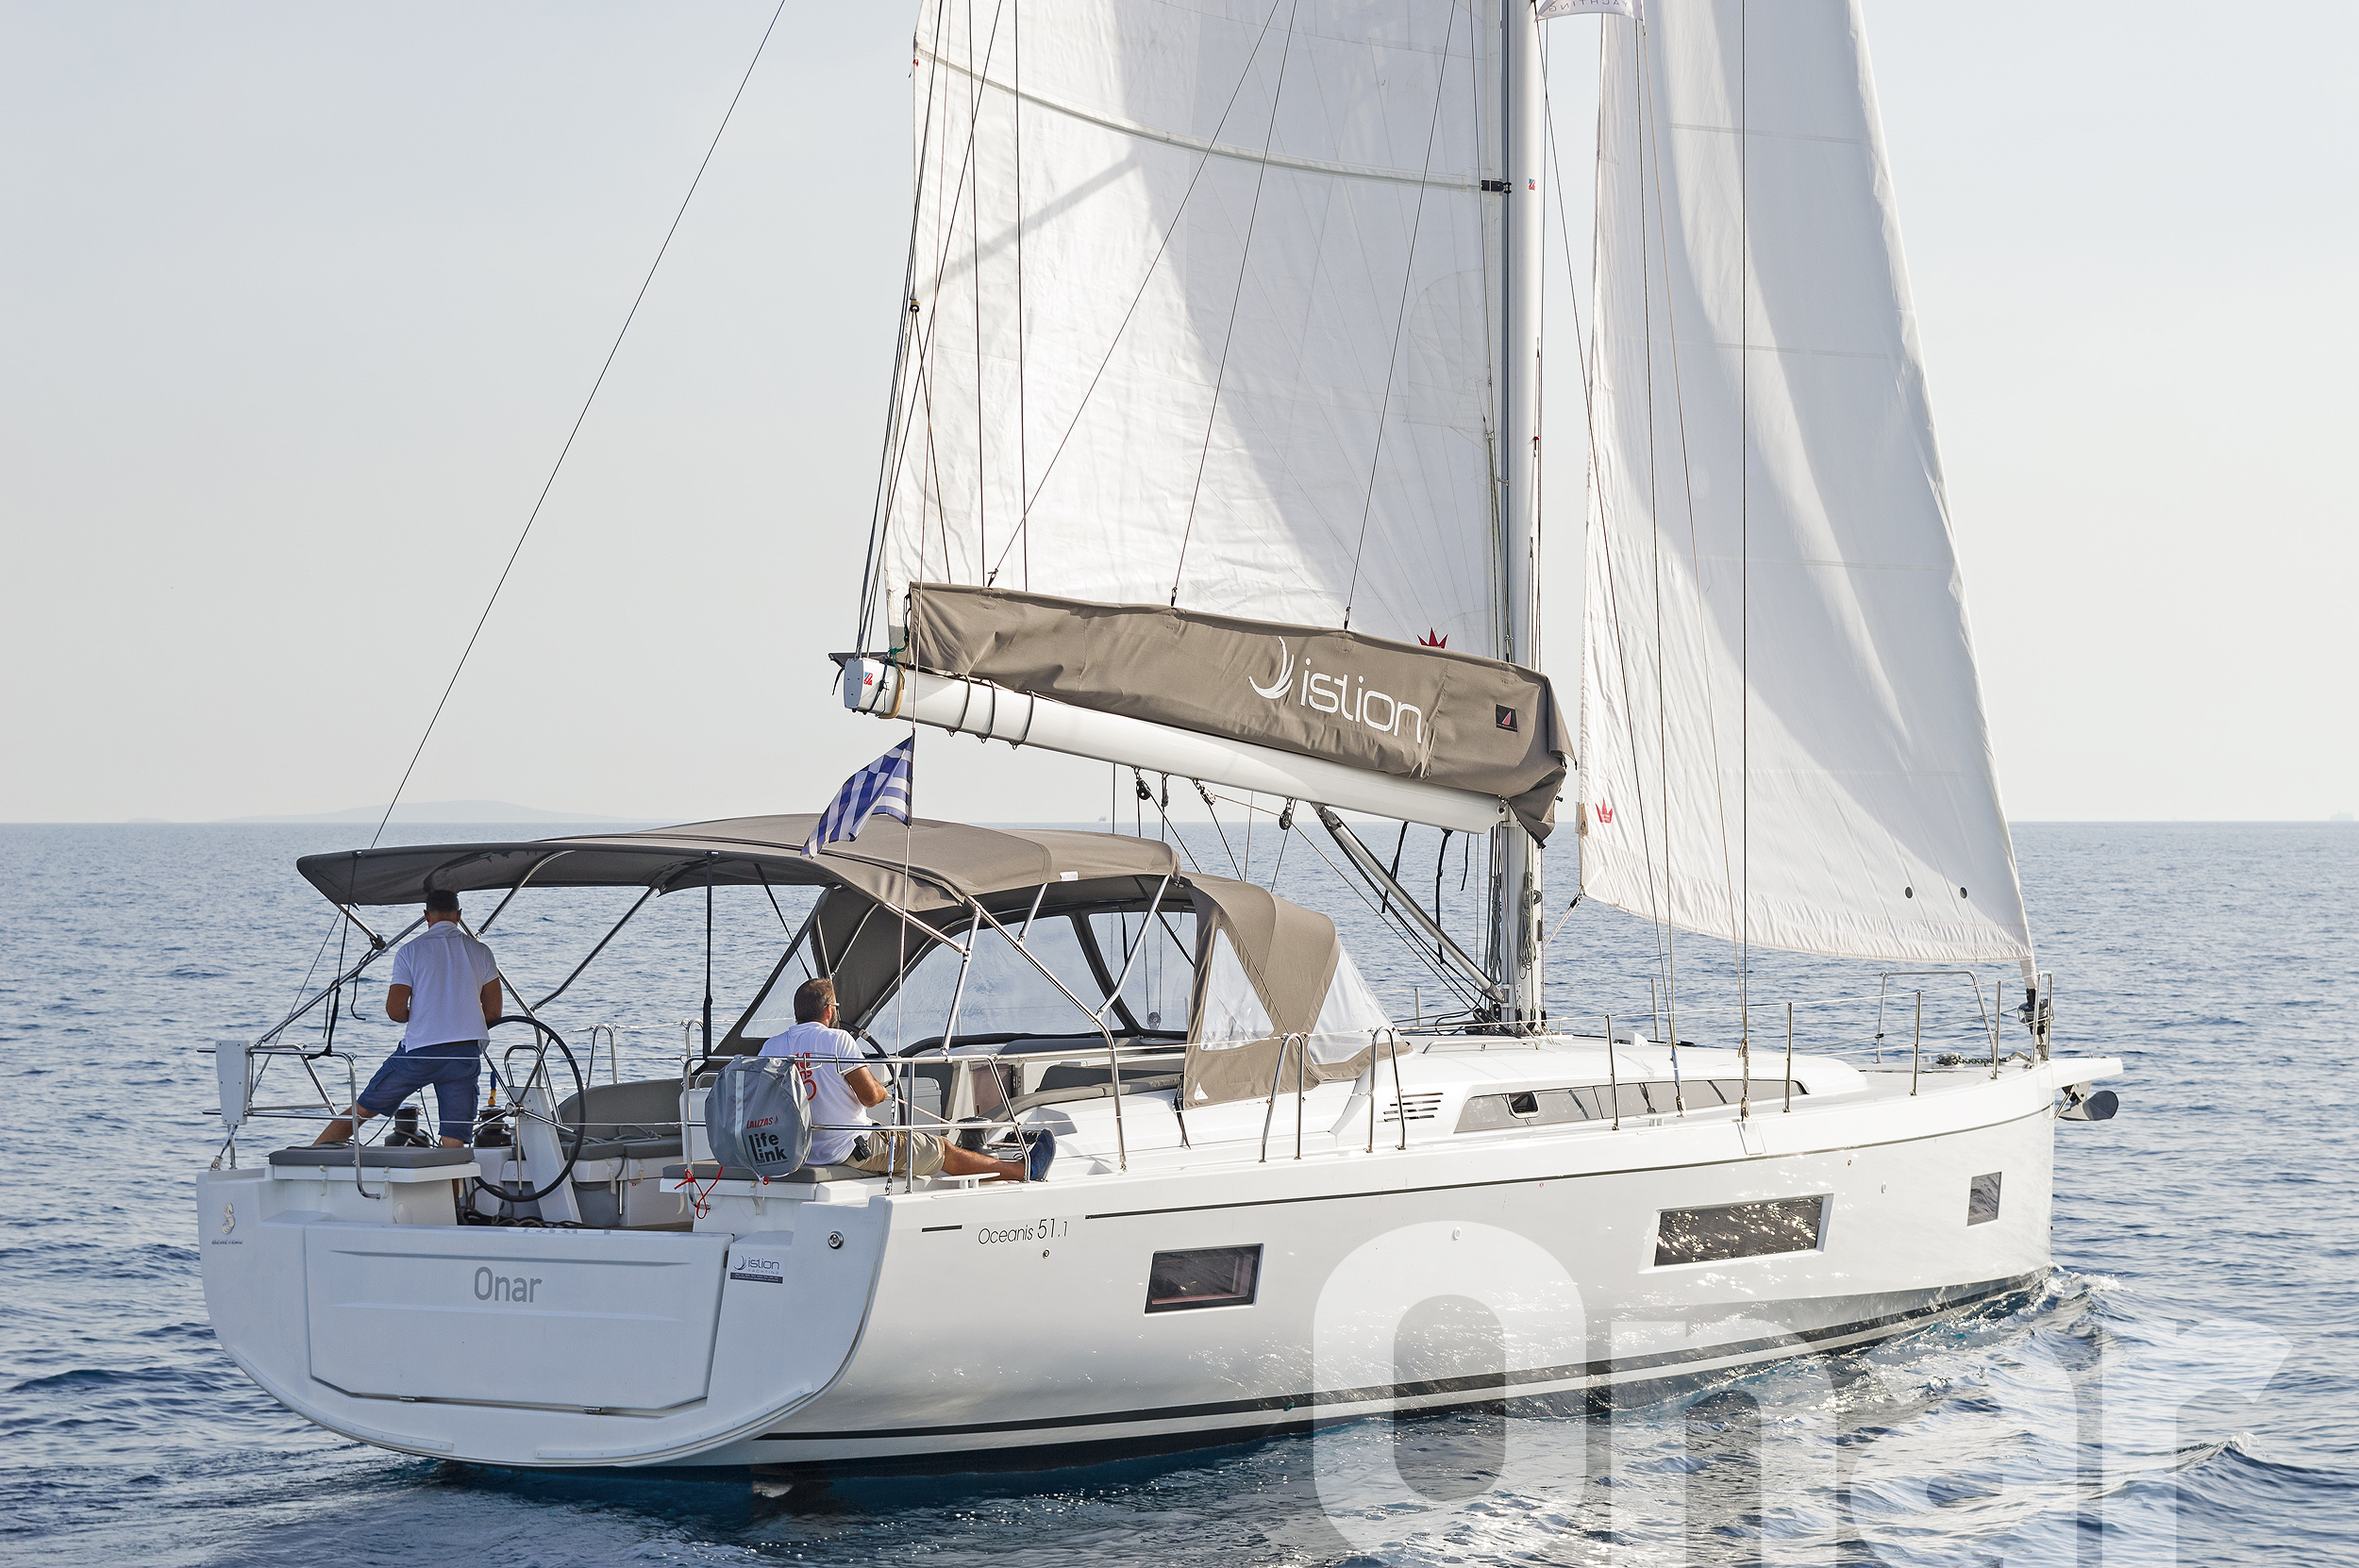 Oceanis 51.1 - Yacht Charter Pointe-à-Pître & Boat hire in Greece Athens and Saronic Gulf Athens Alimos Alimos Marina 1